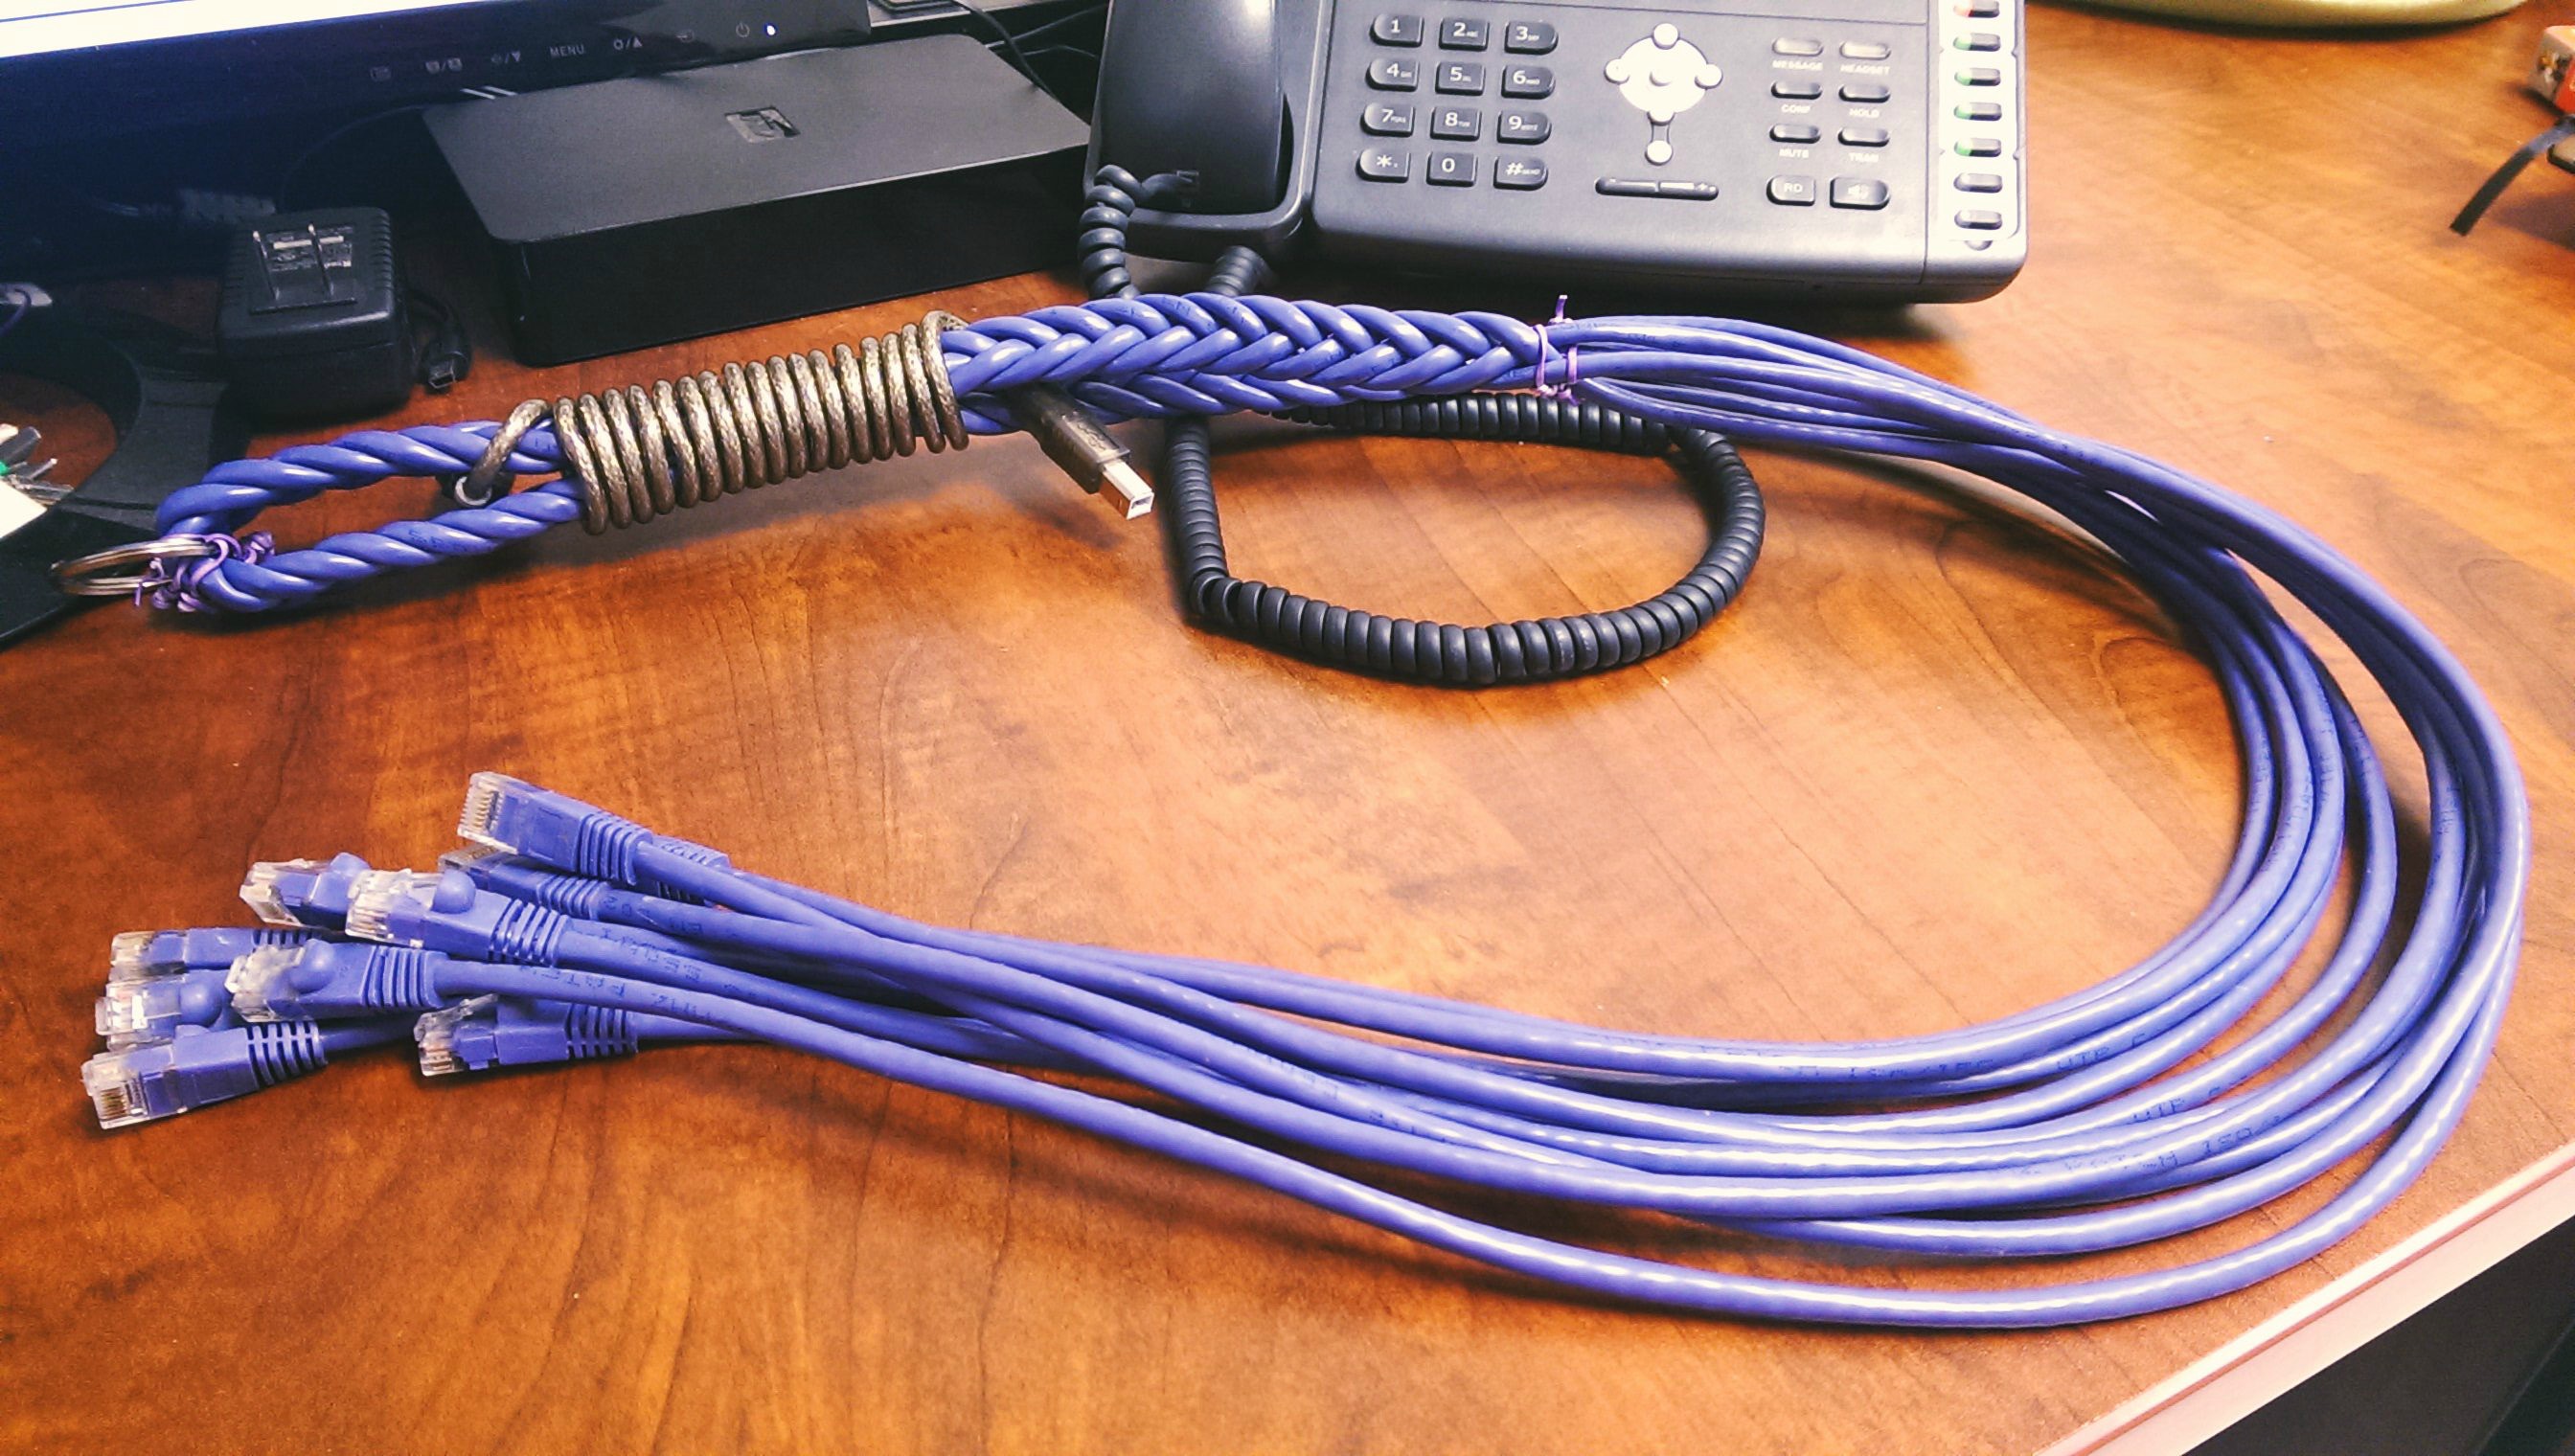 network cable cat o nine tails